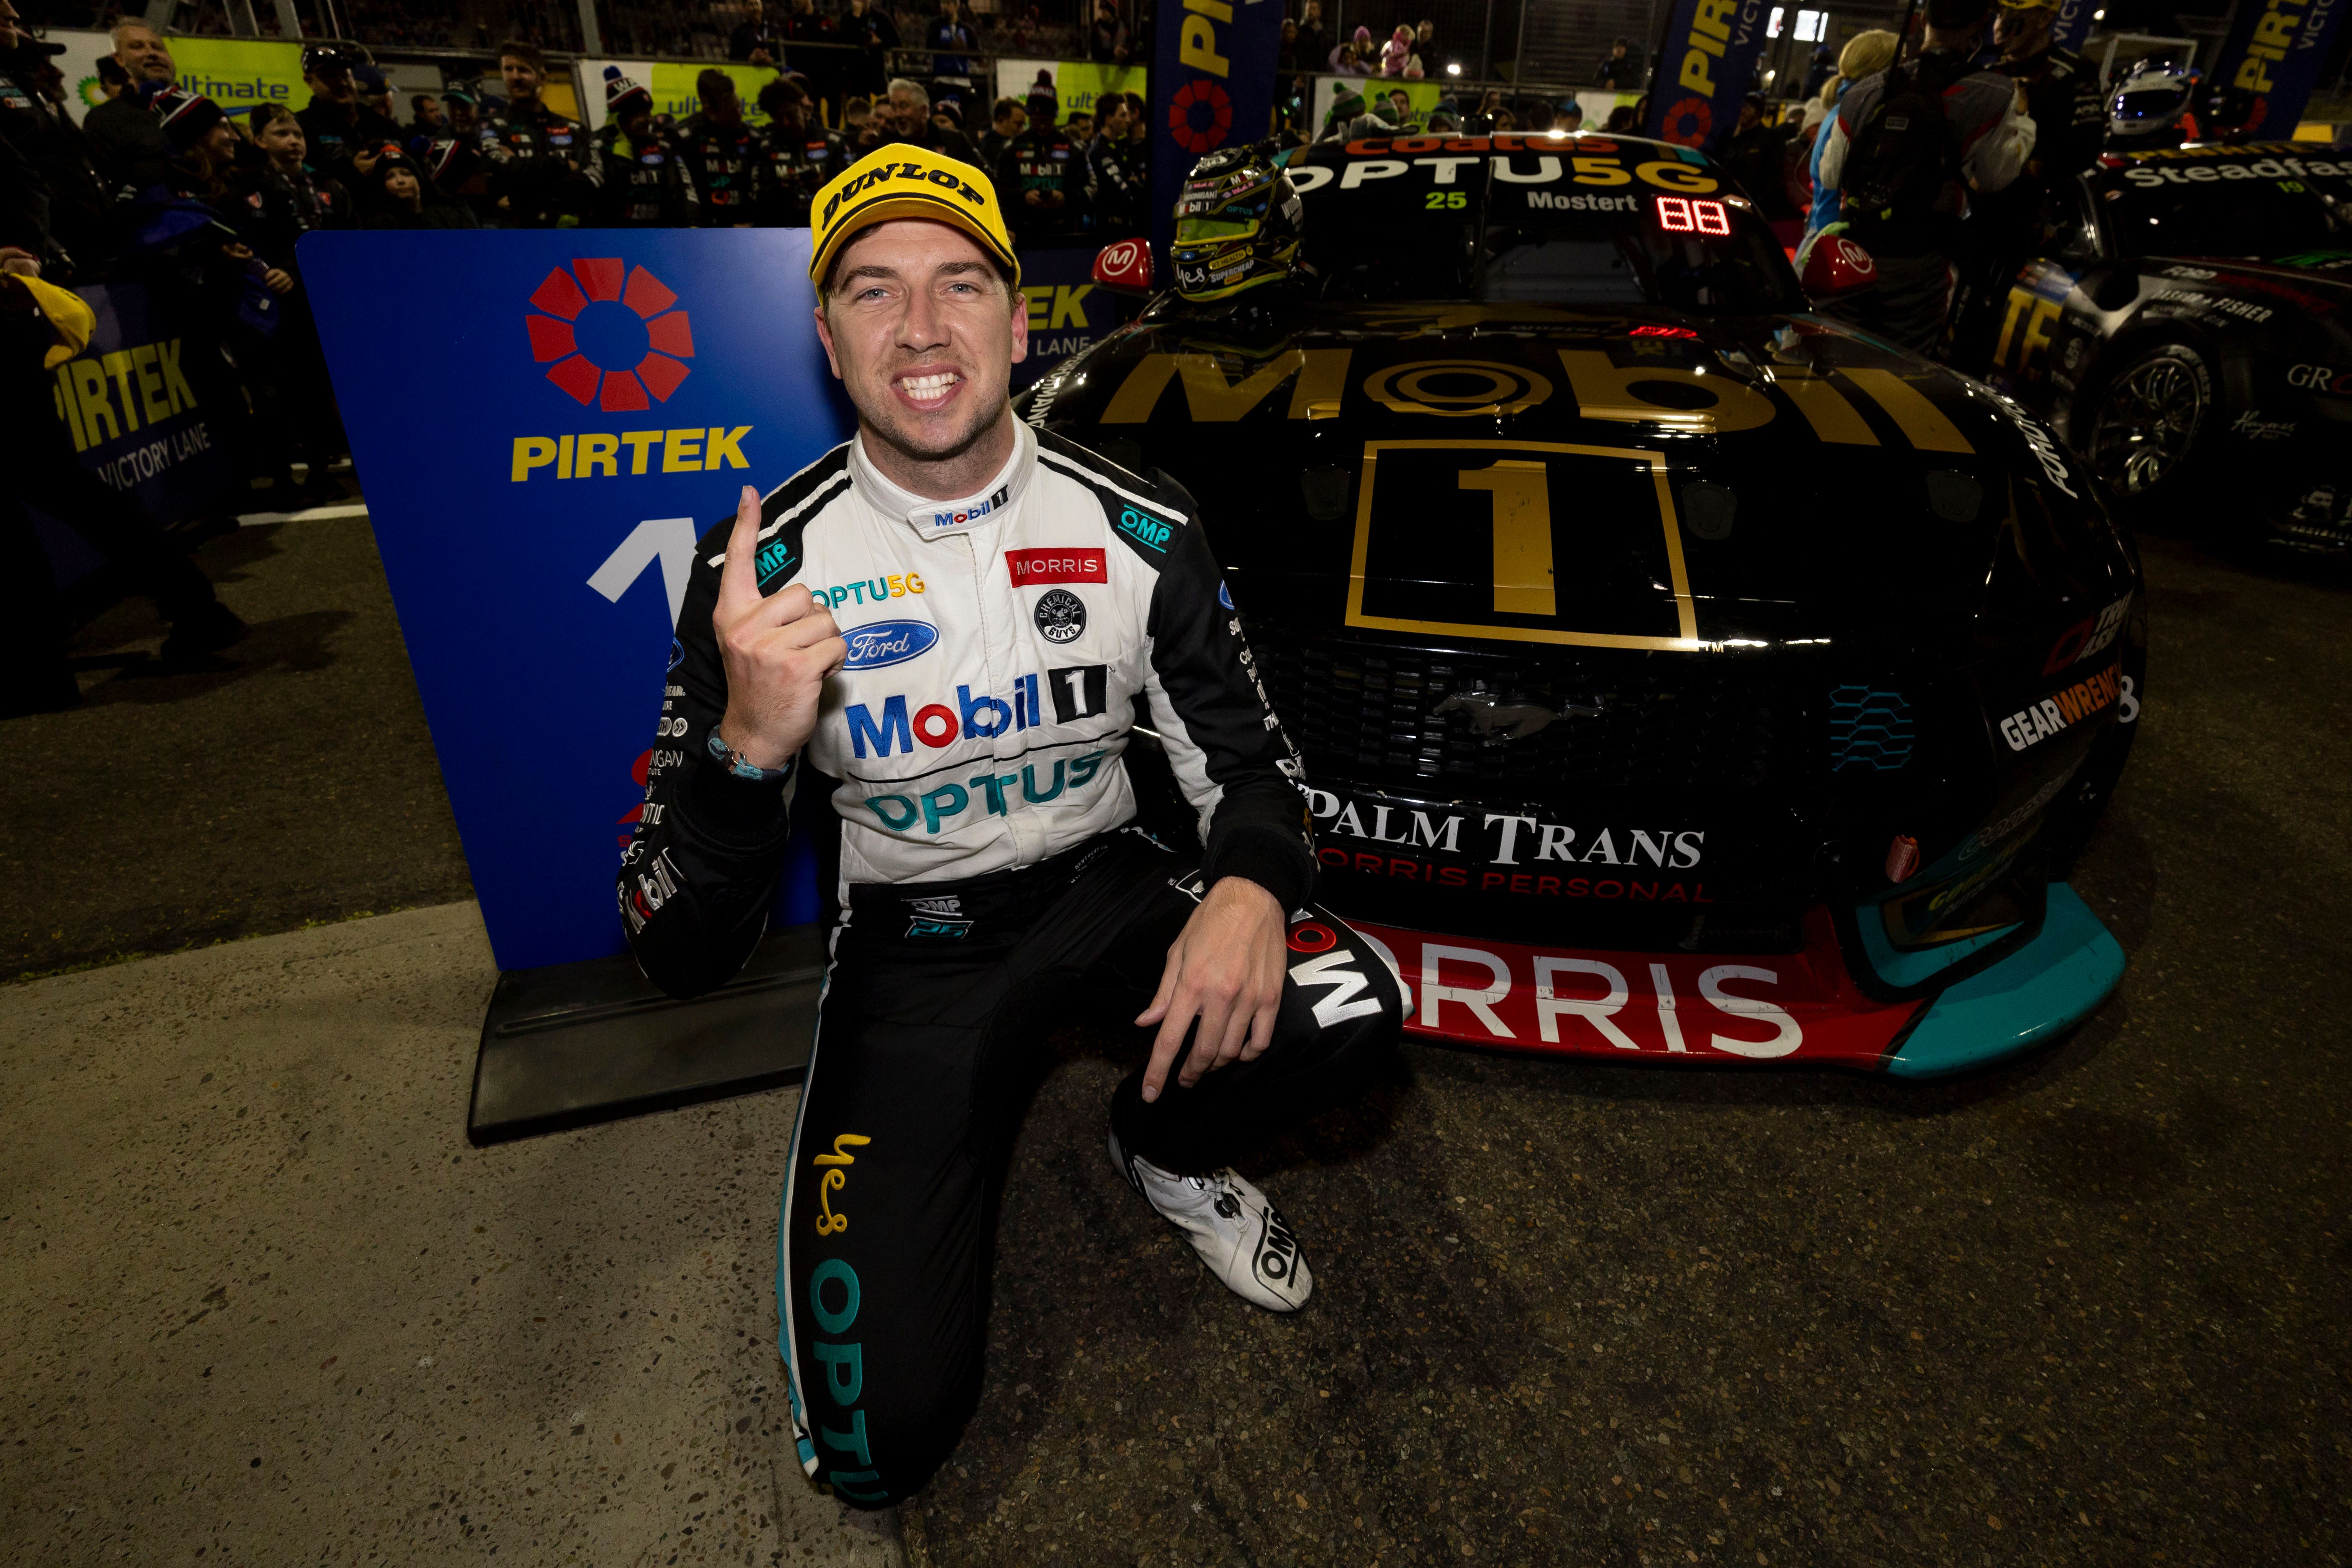 Chaz Mostert makes late move to win Sydney night race